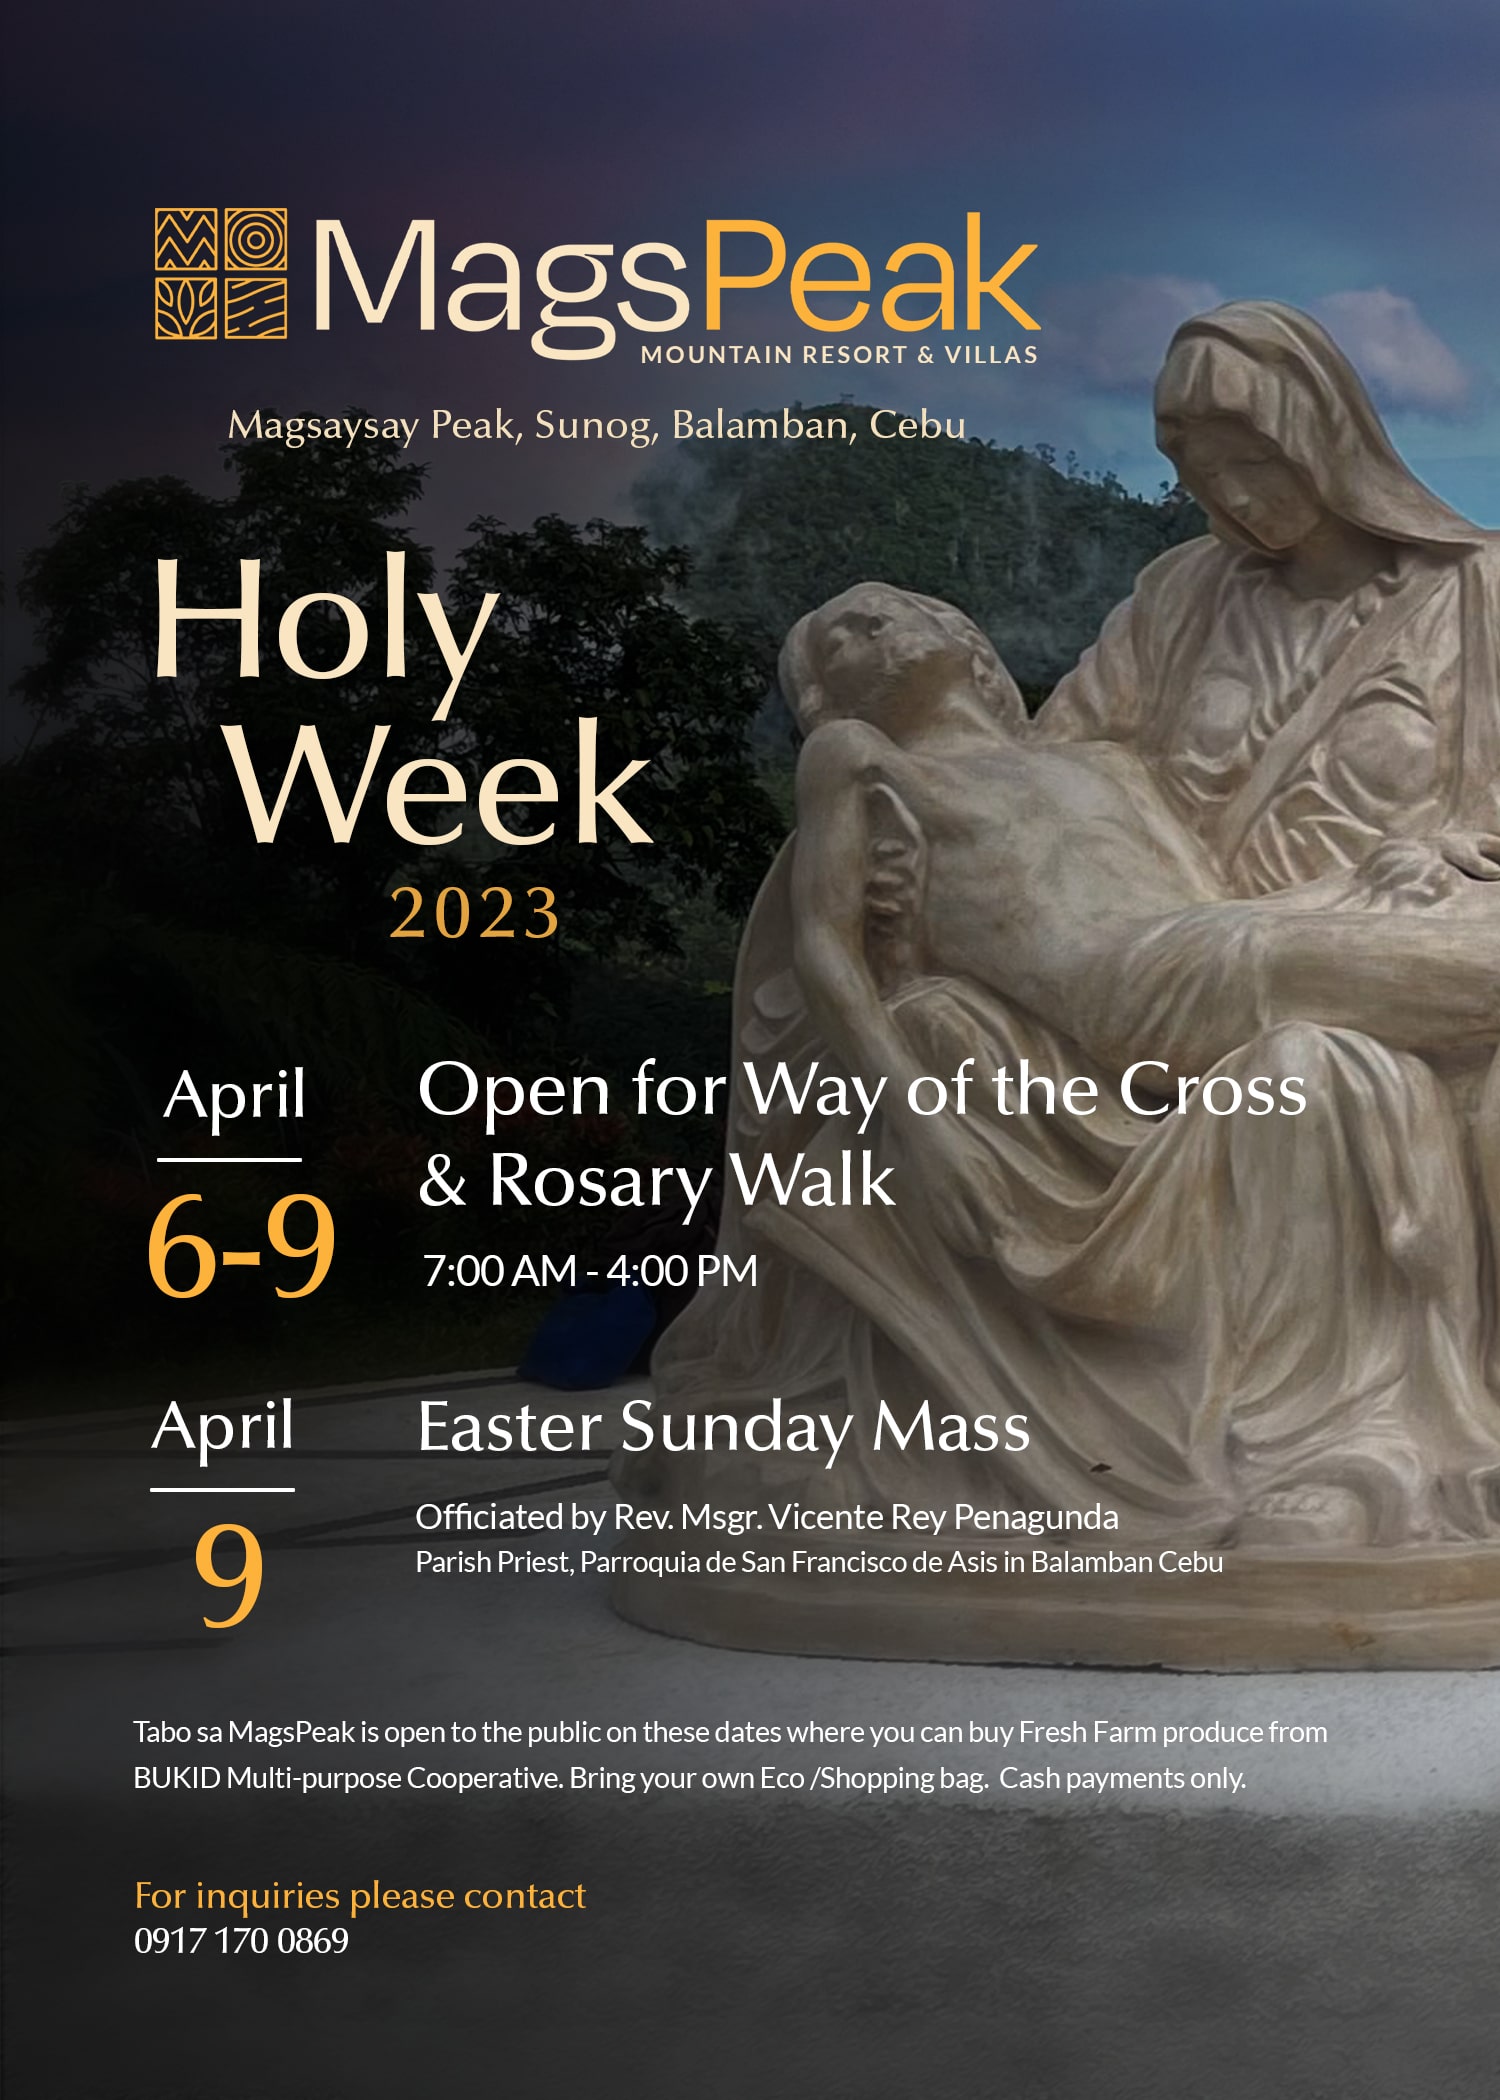 MagsPeak Mountain Resort & Villas by CLI opens new chapel, Way of the Cross & Rosary Walk ideal for Holy Week devotions